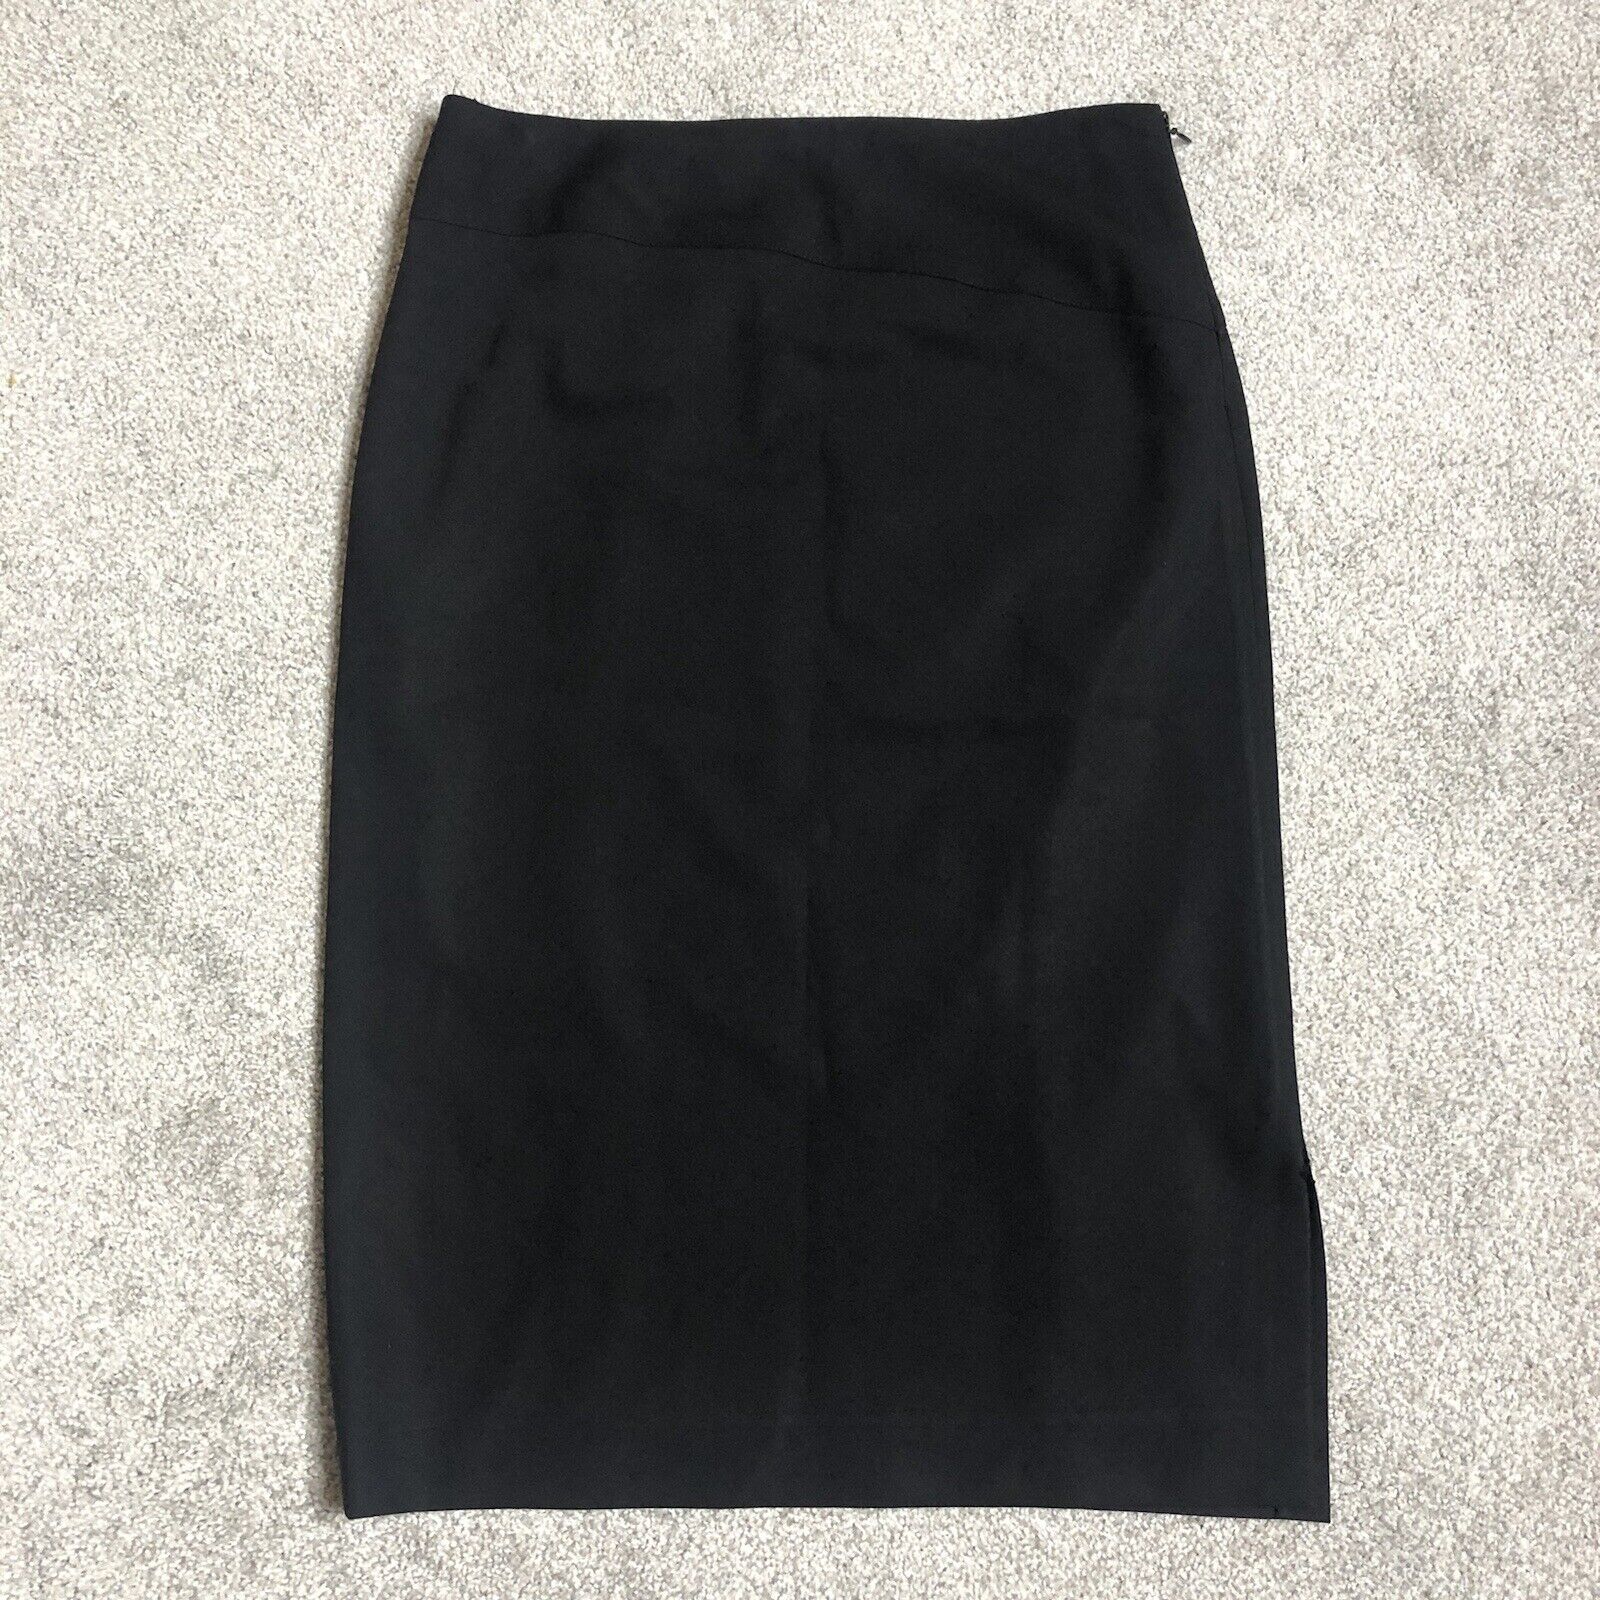 Narciso Rodriguez Skirt Women Size 4 Pencil Black Solid Wool Blend